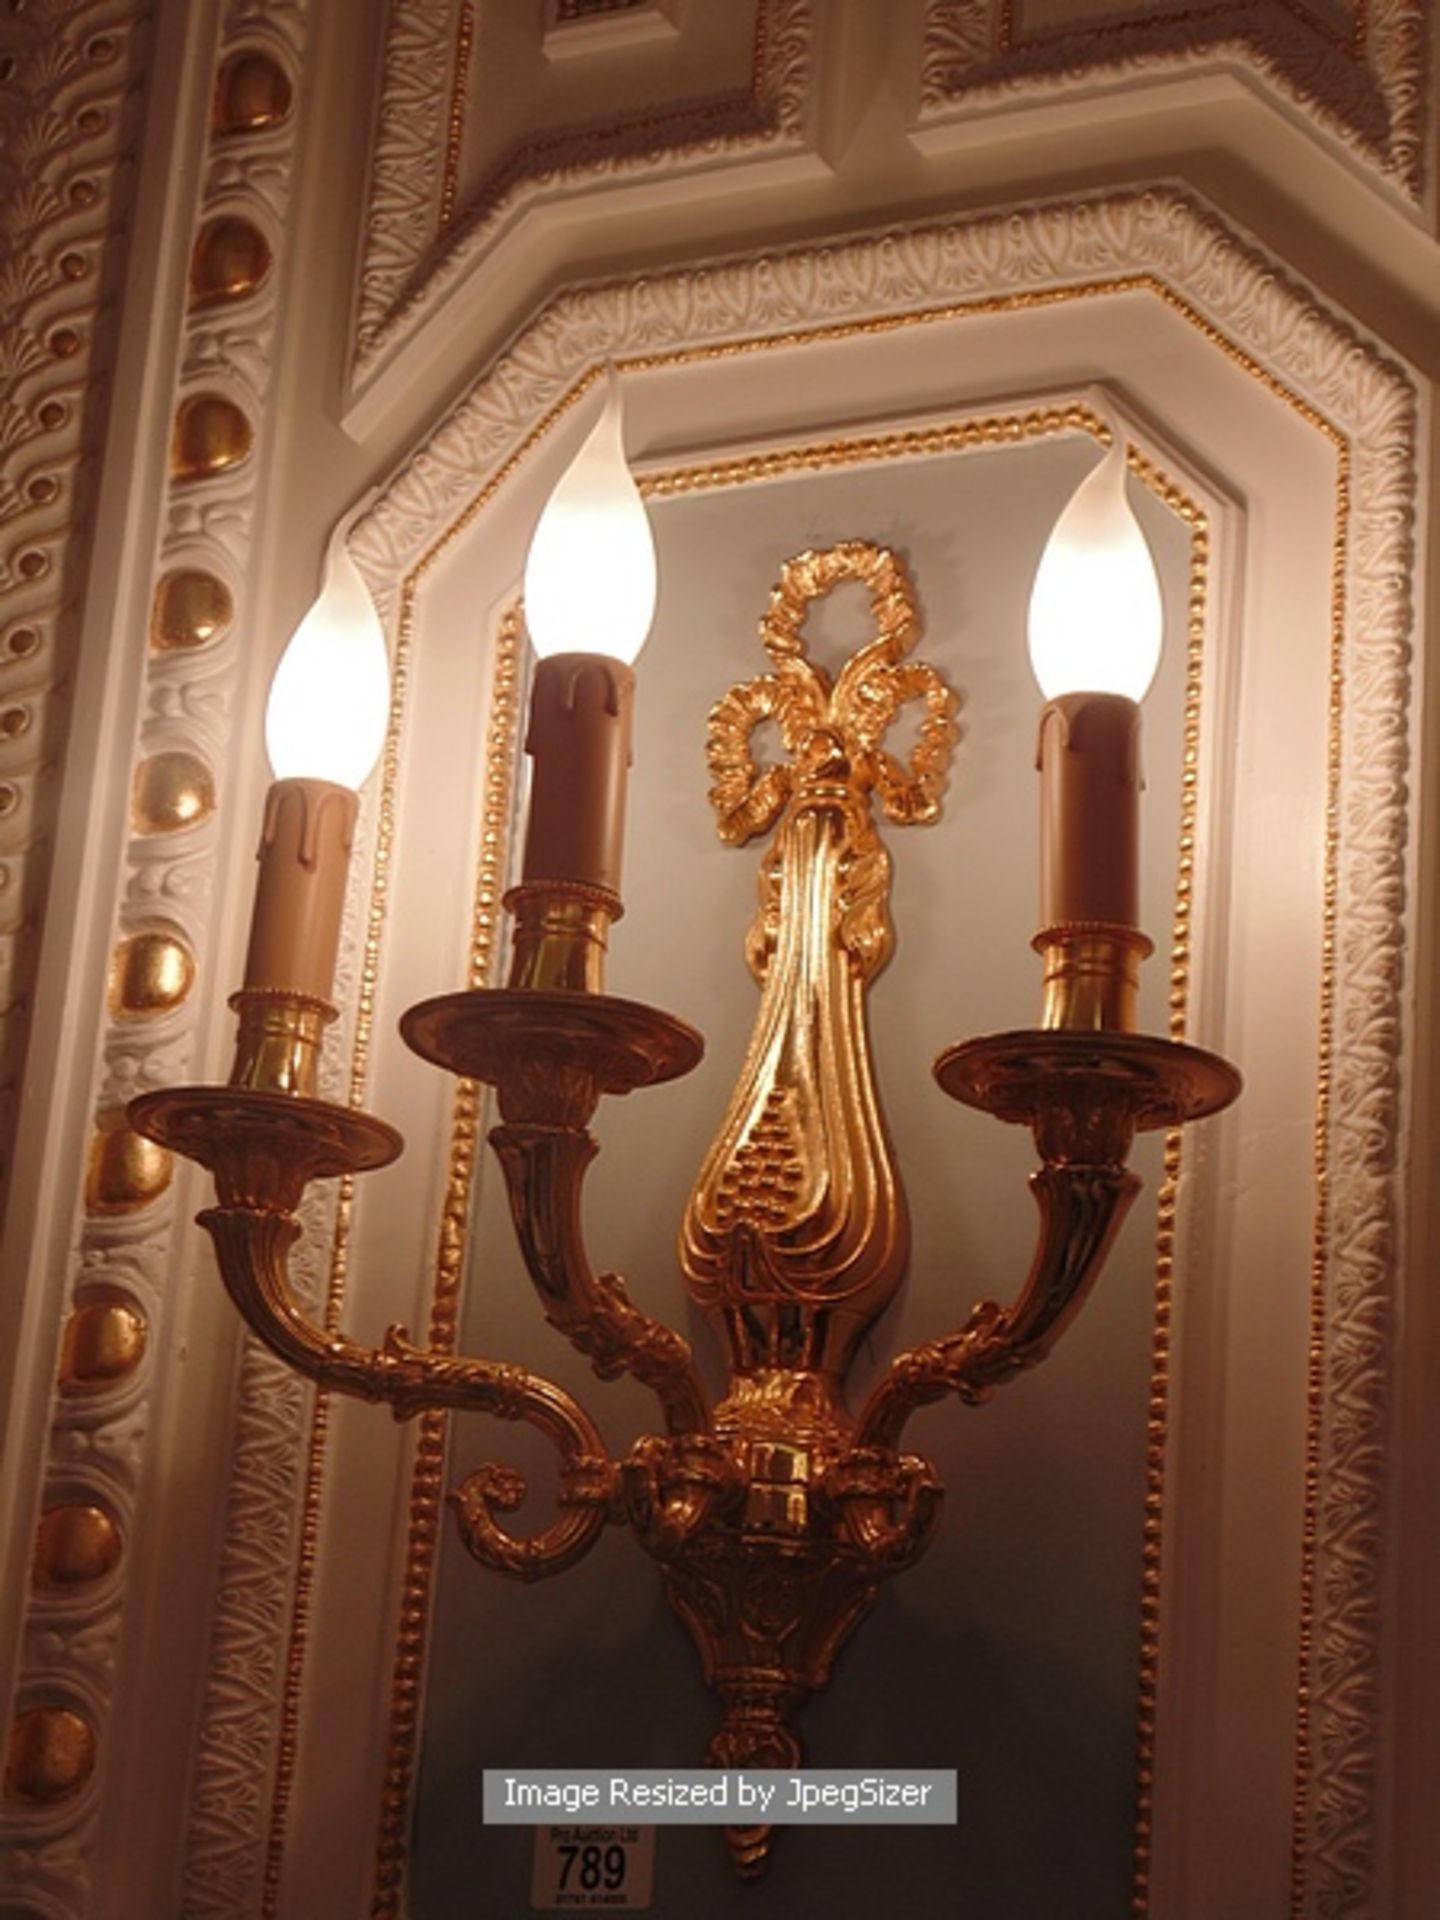 A pair of Laudarte wall sconces three candle wall light, bronze castings gold 24K finish 380mm x - Image 2 of 3